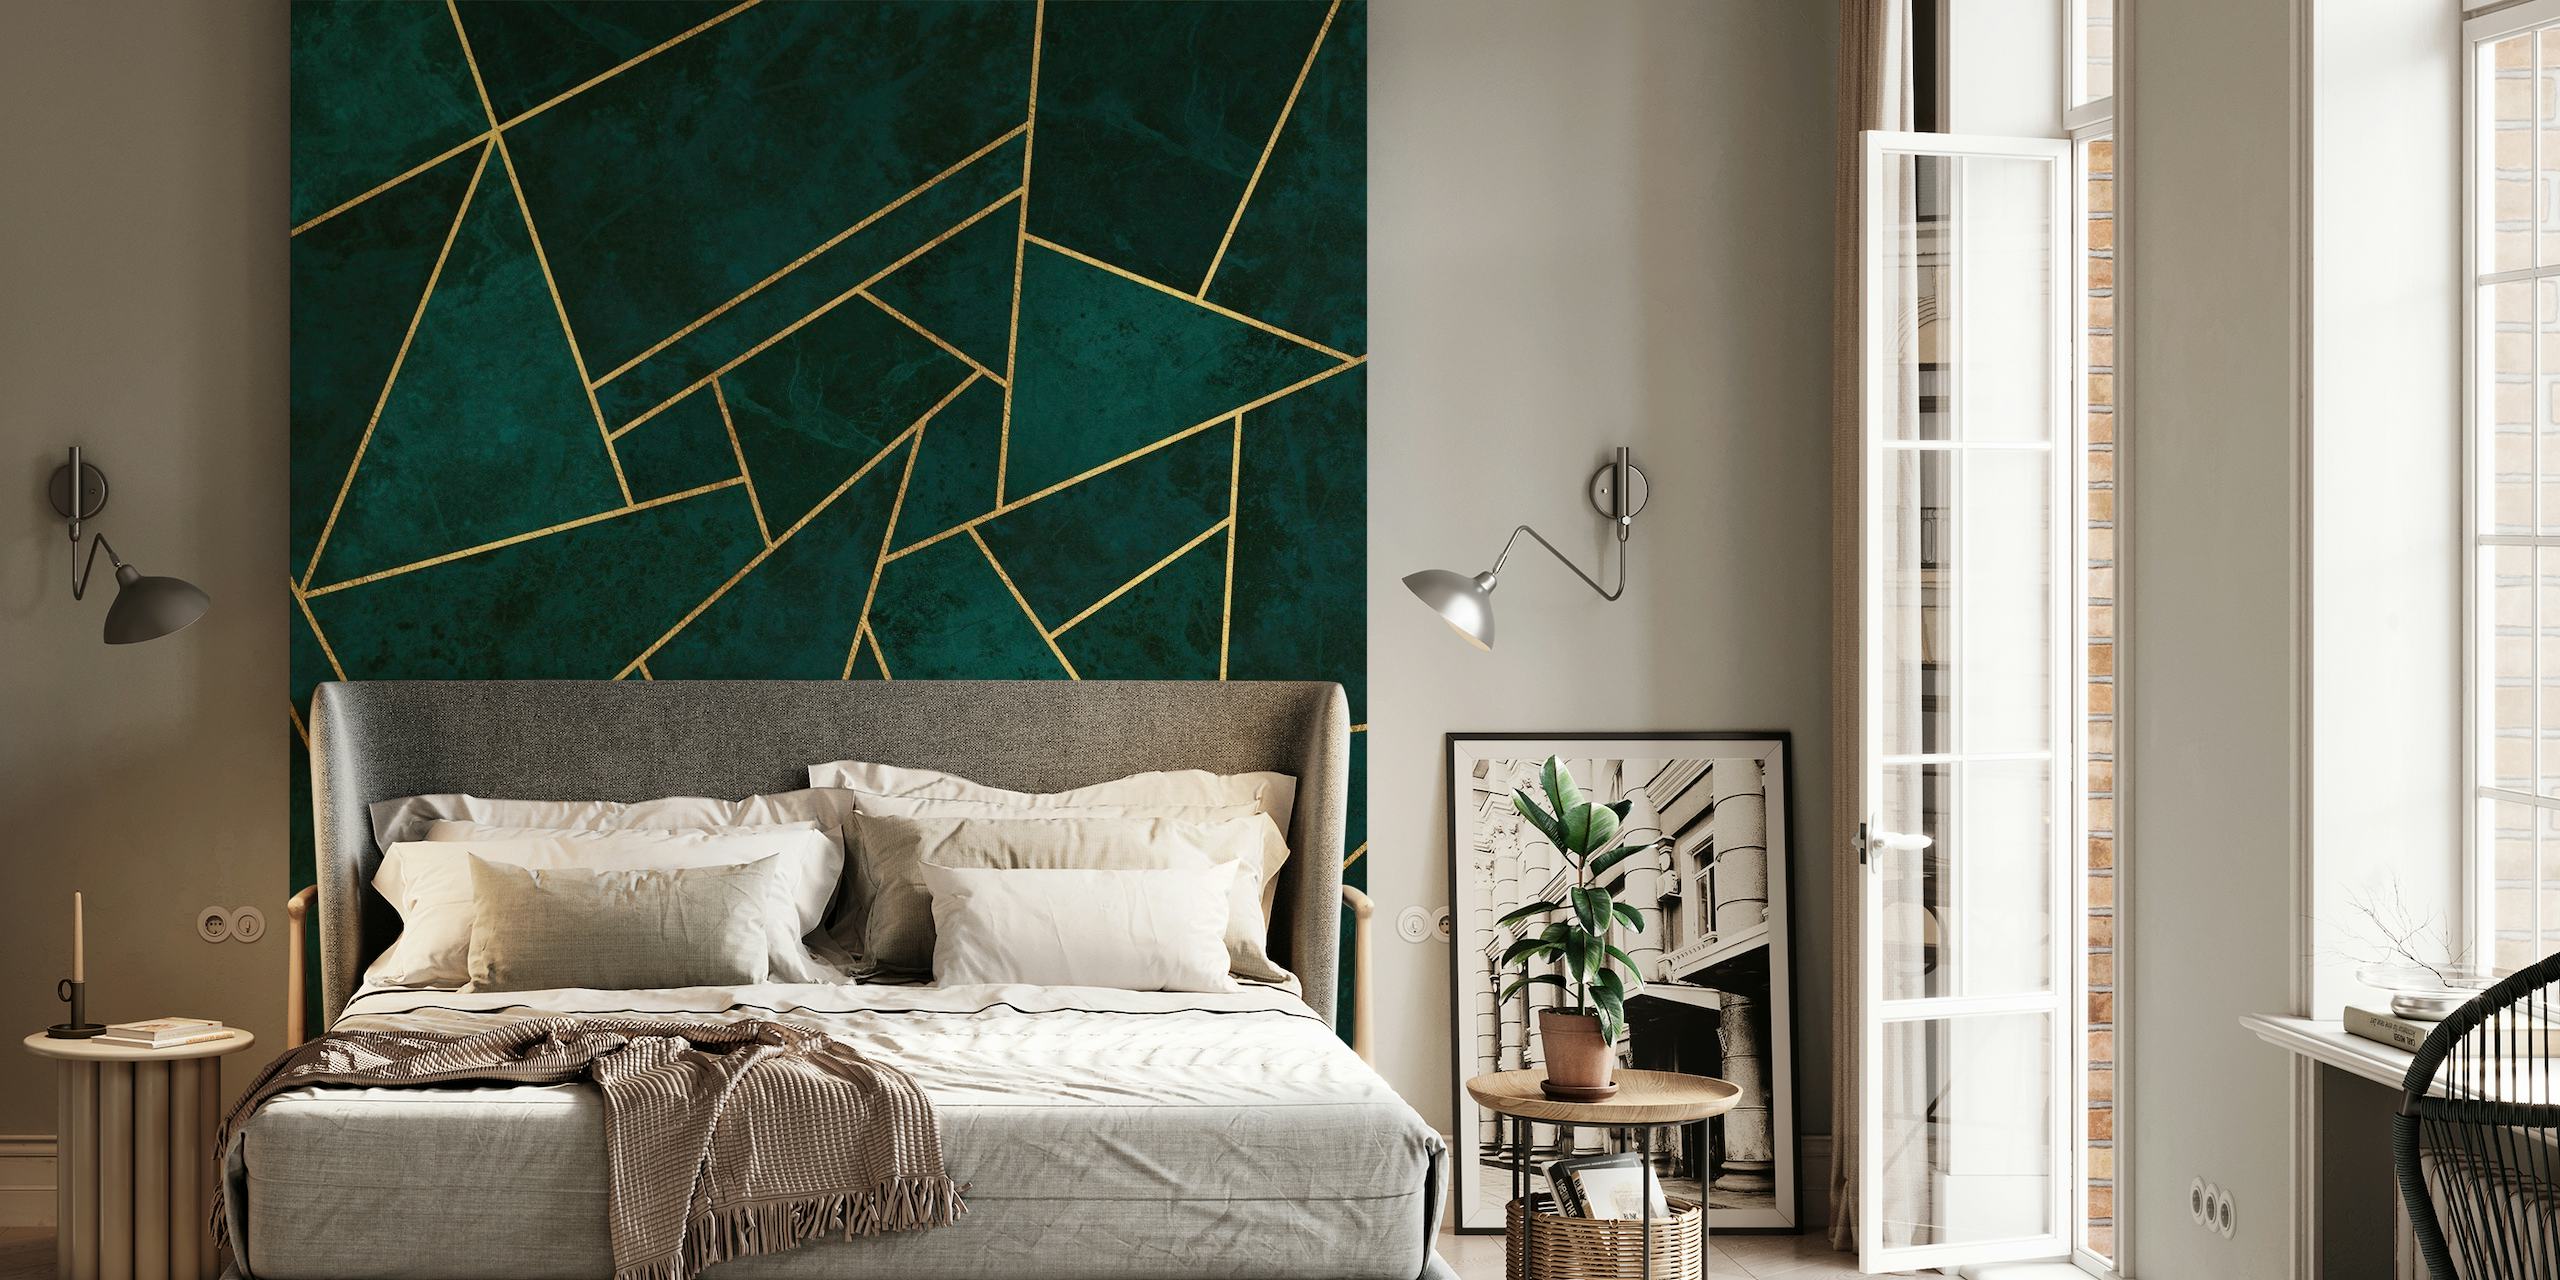 Luxury Deep Teal Stone Mosaic wall mural with gold accents